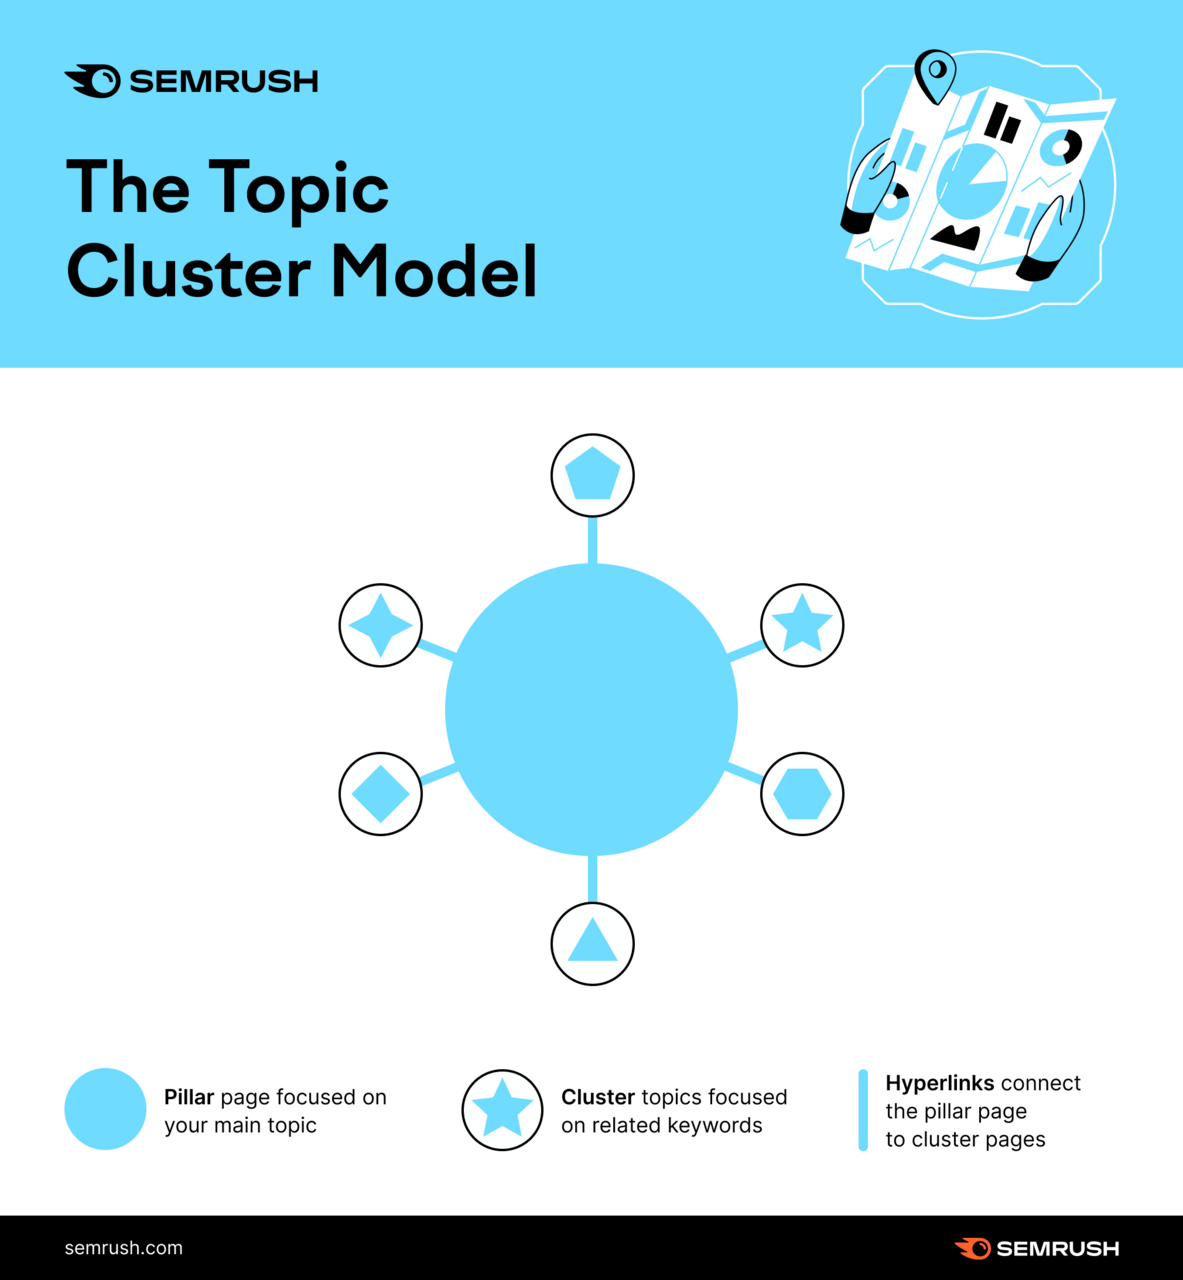 Topic clusters are made up of pillar pages focused on the main topic and cluster topic pages focused on related keywords, with hyperlinks between them.